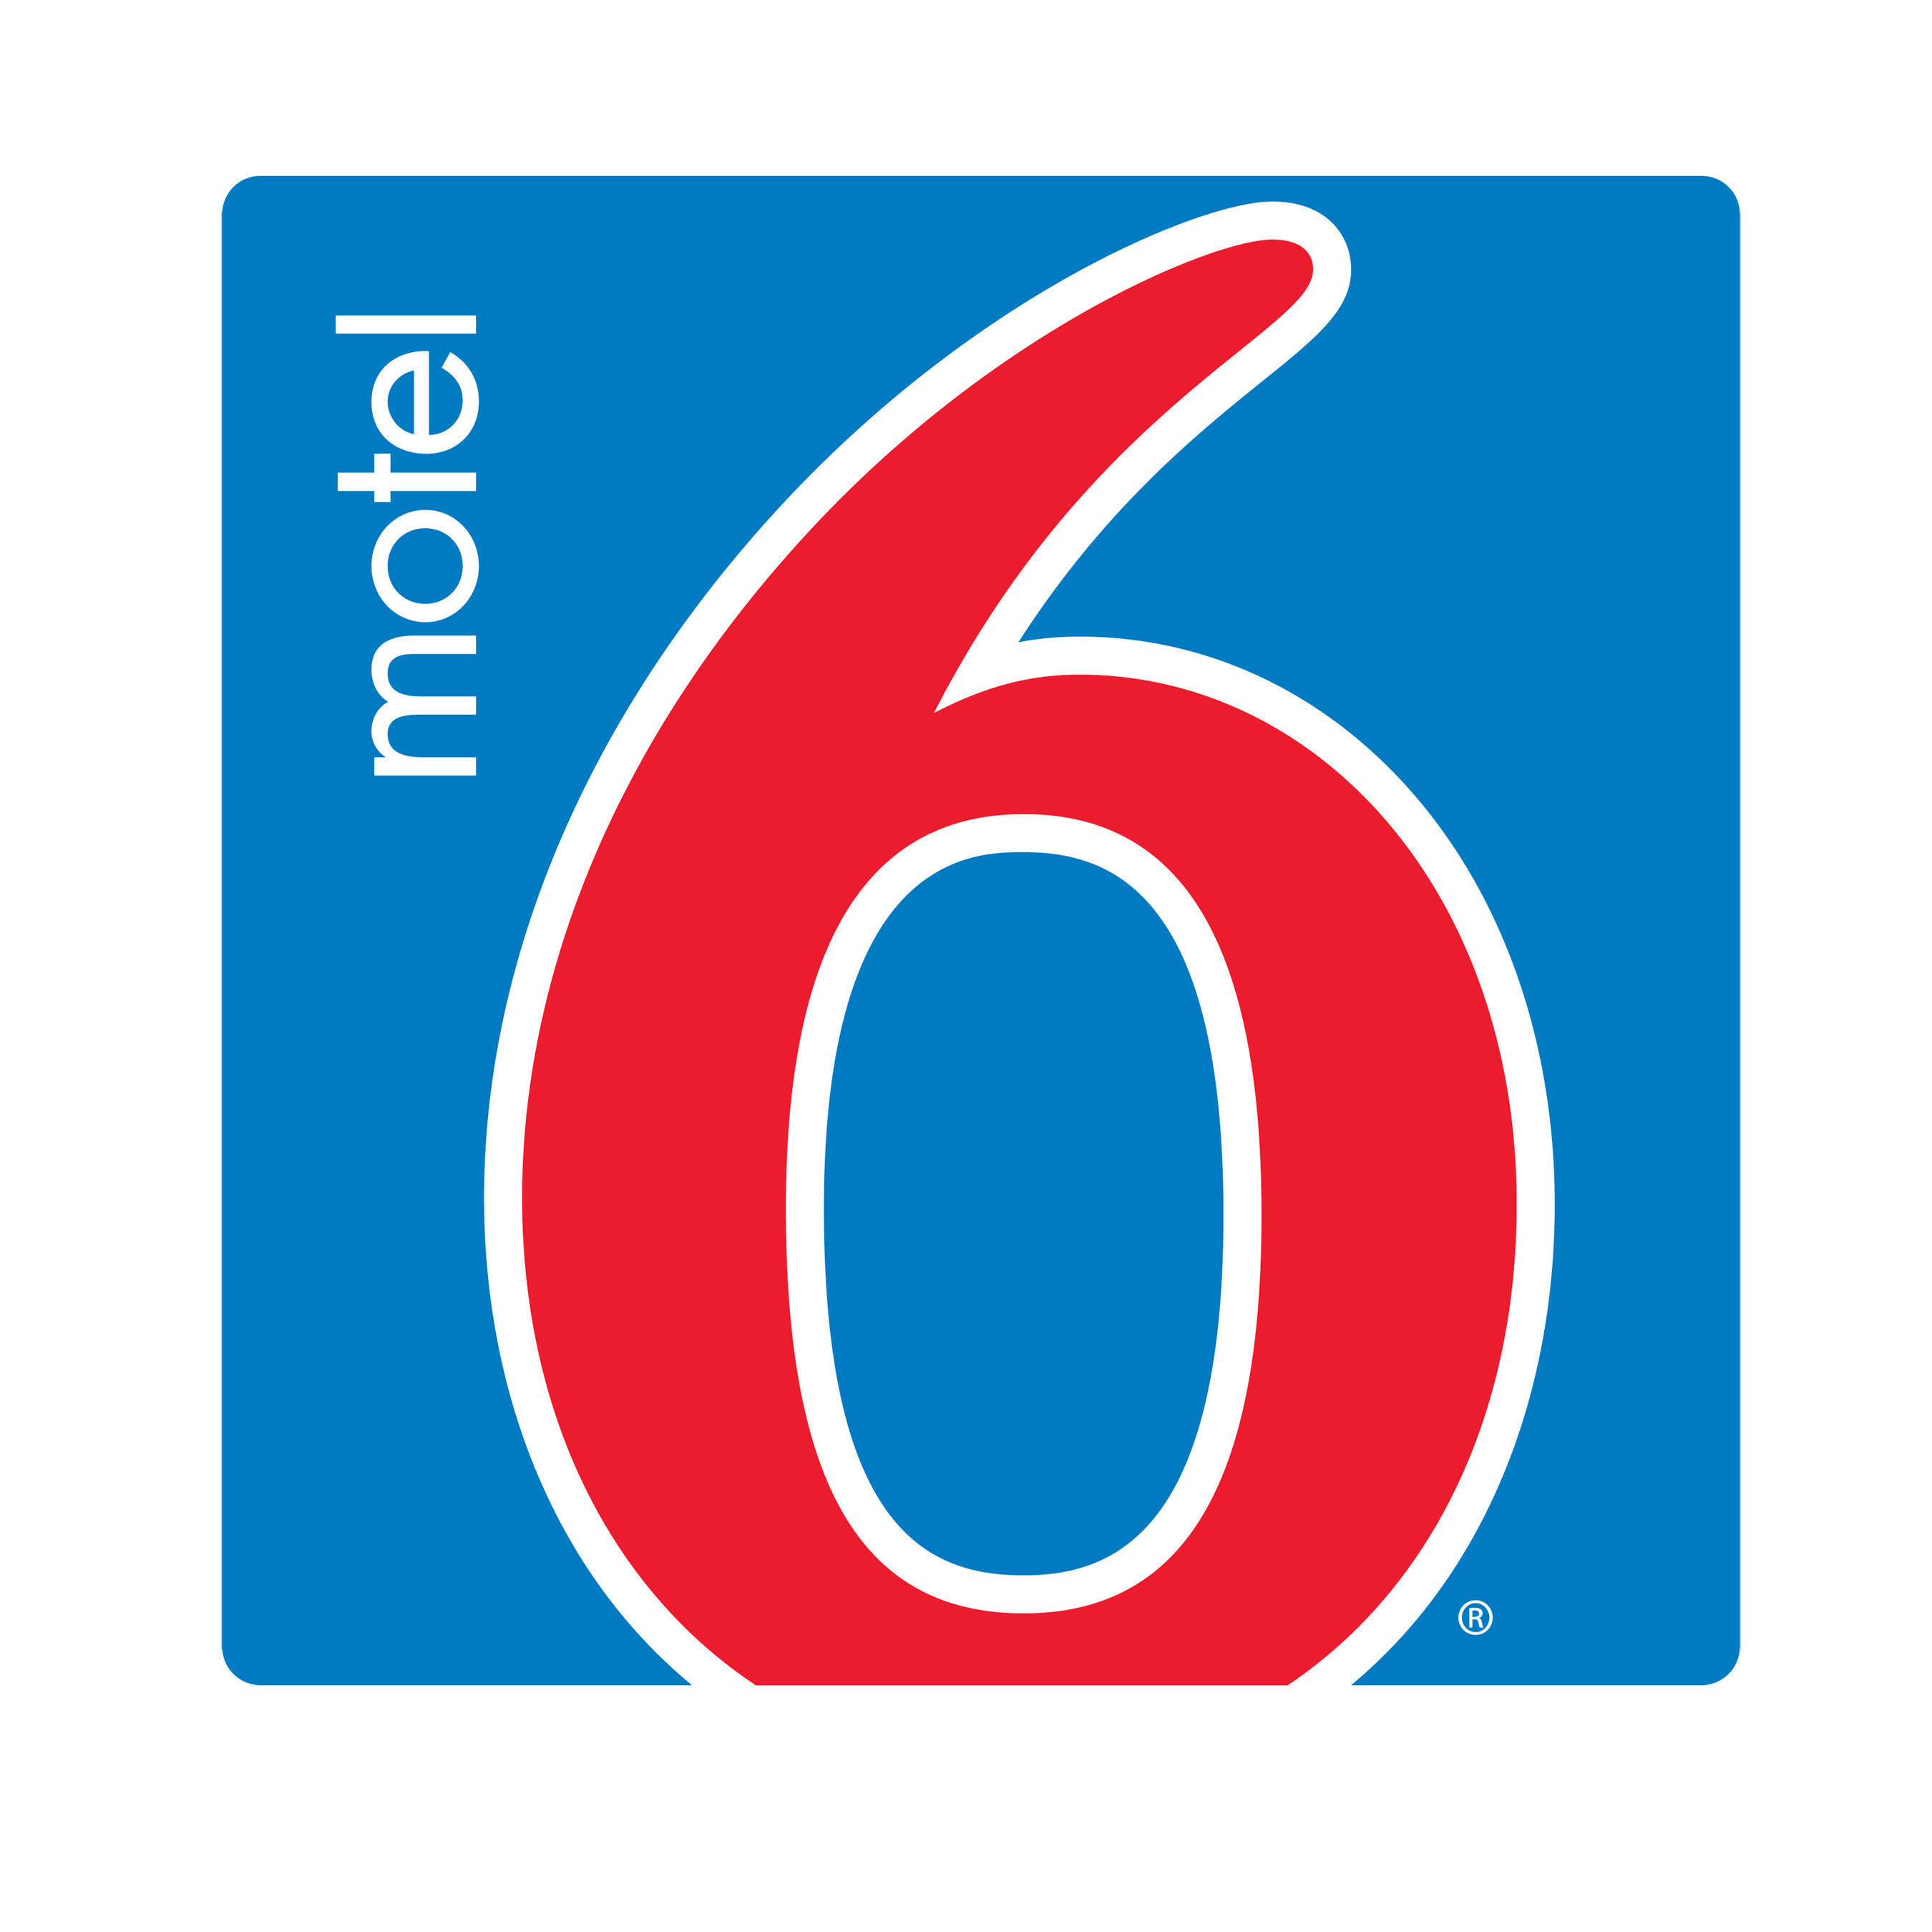 Motel 6 Coupons